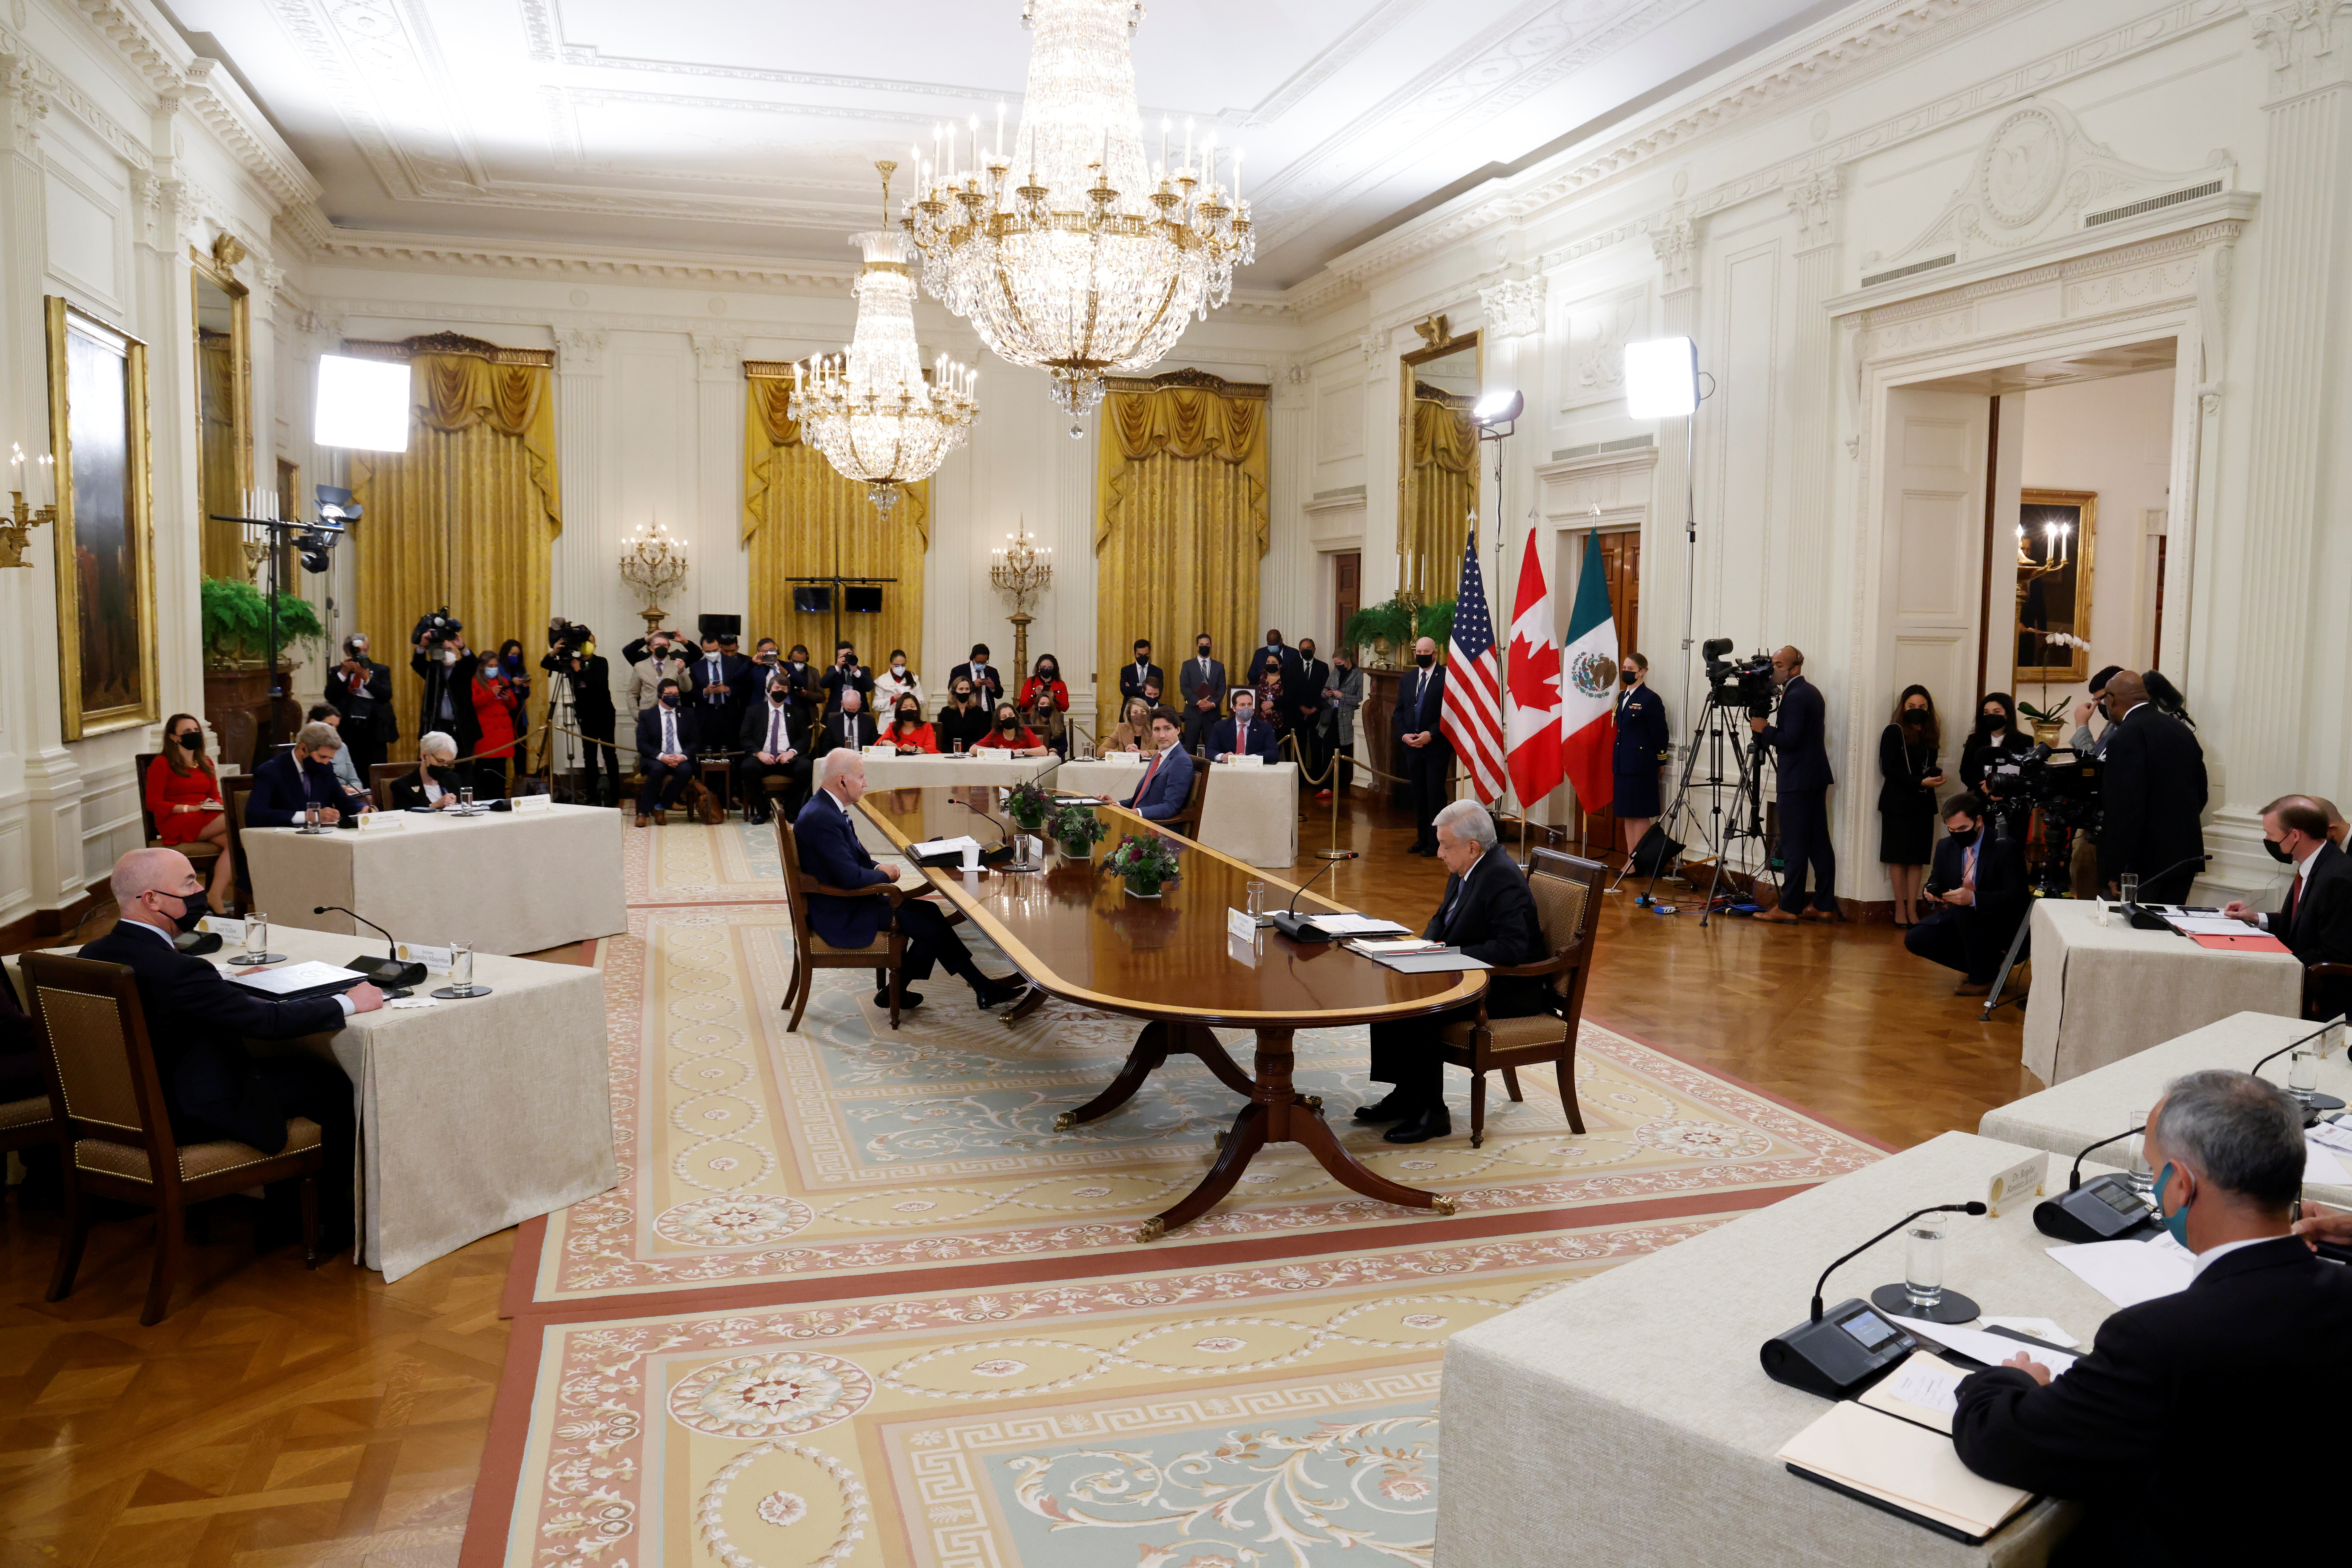 U.S. President Biden hosts leaders of Canada and Mexico at White House in Washington